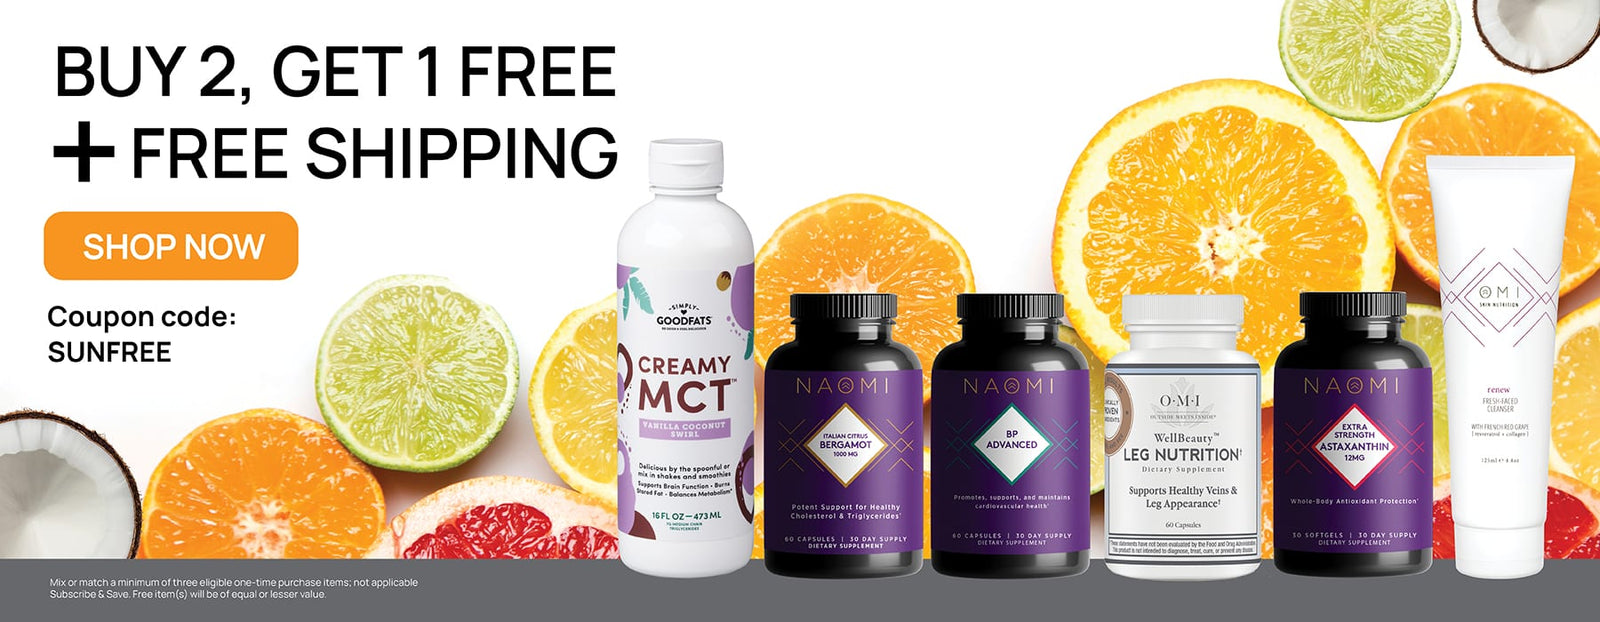 Buy two get one free with code: SUNFREE